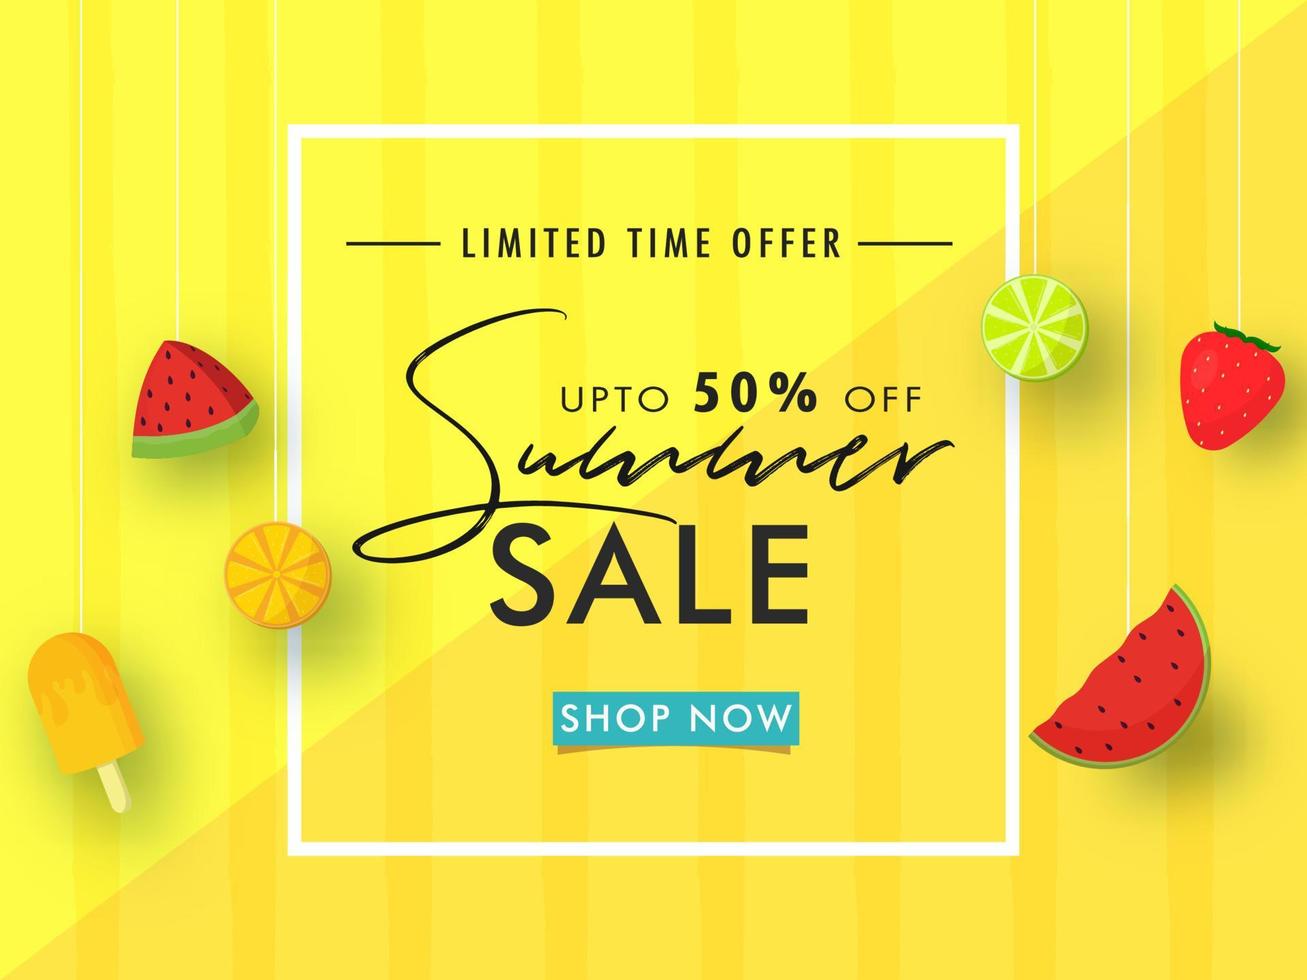 Summer Sale Poster Design with Discount Offer Hanging Watermelon Slice, Lemon, Strawberry and Ice Cream Decorated on Yellow Striped Background. vector